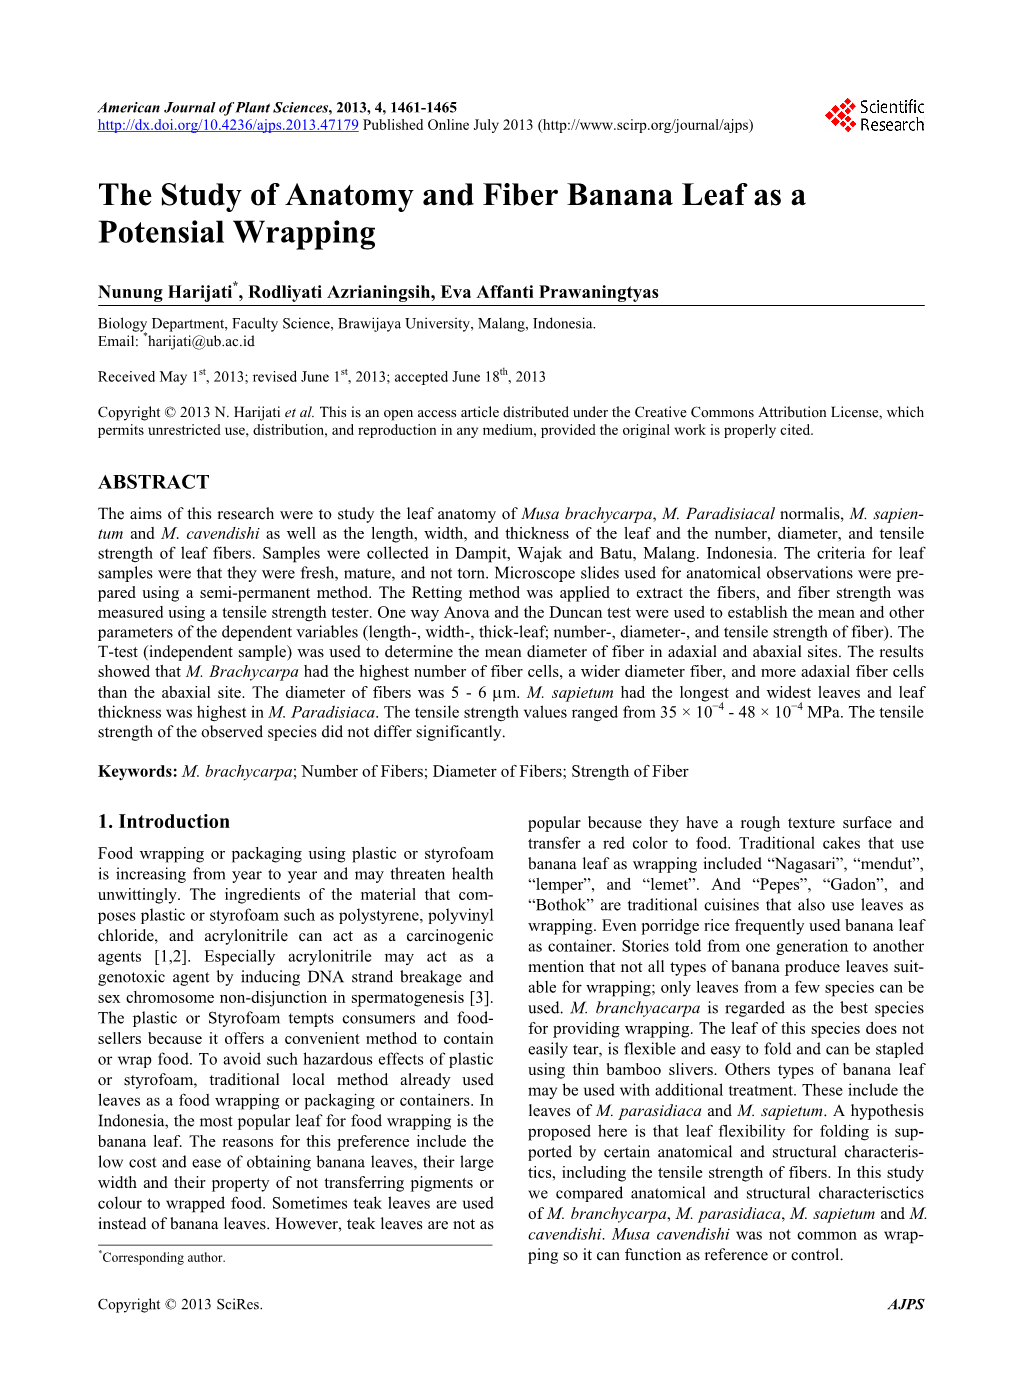 The Study of Anatomy and Fiber Banana Leaf As a Potensial Wrapping